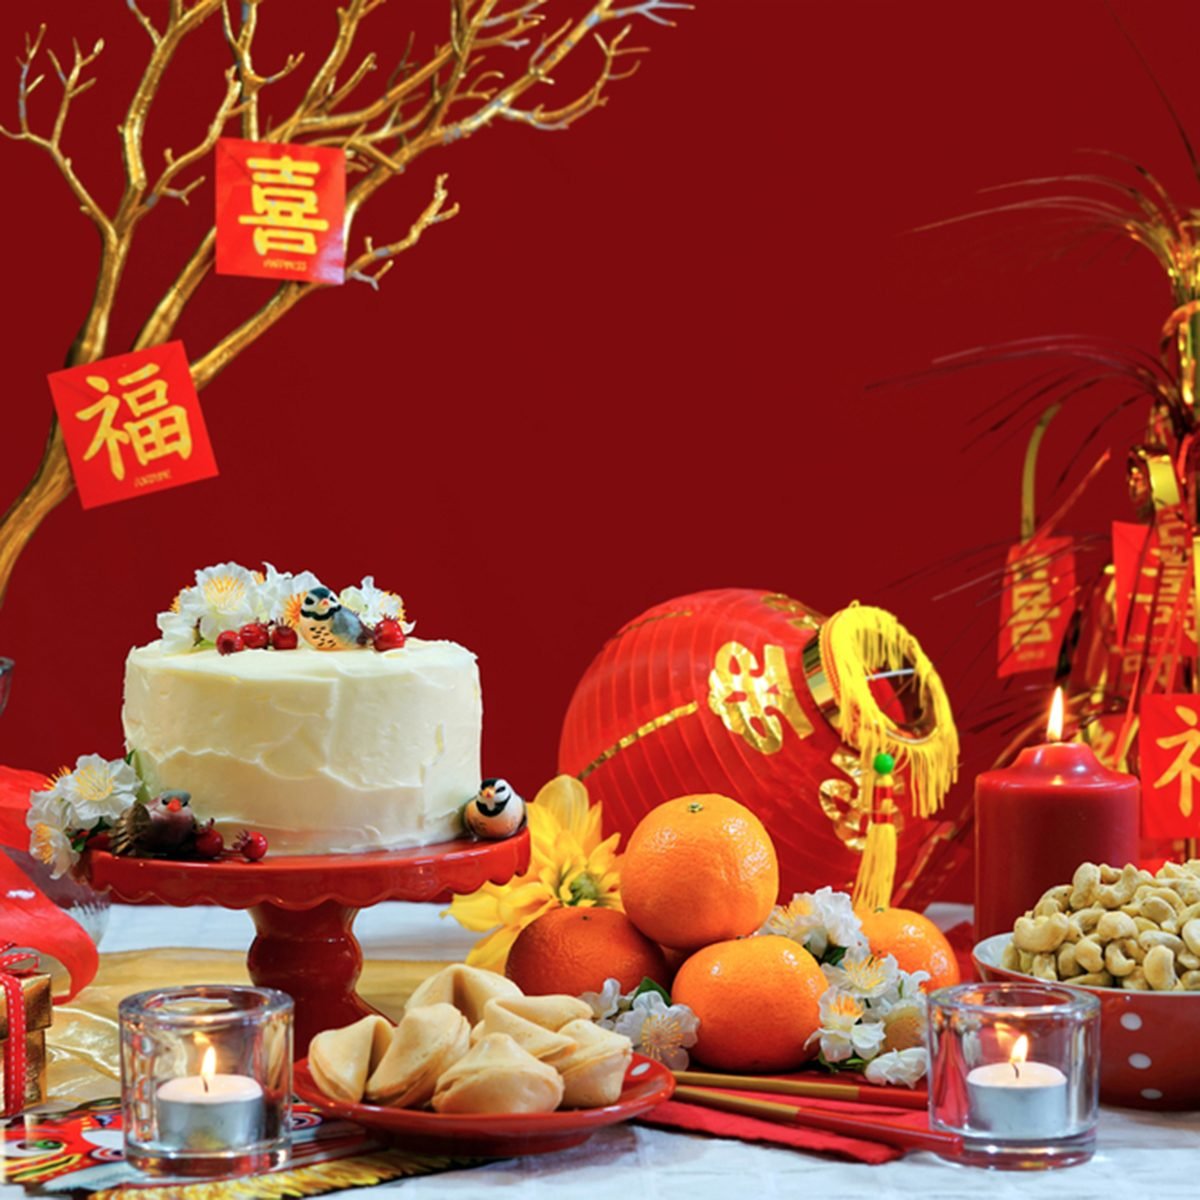 Seven home decorating ideas to try this Chinese New Year